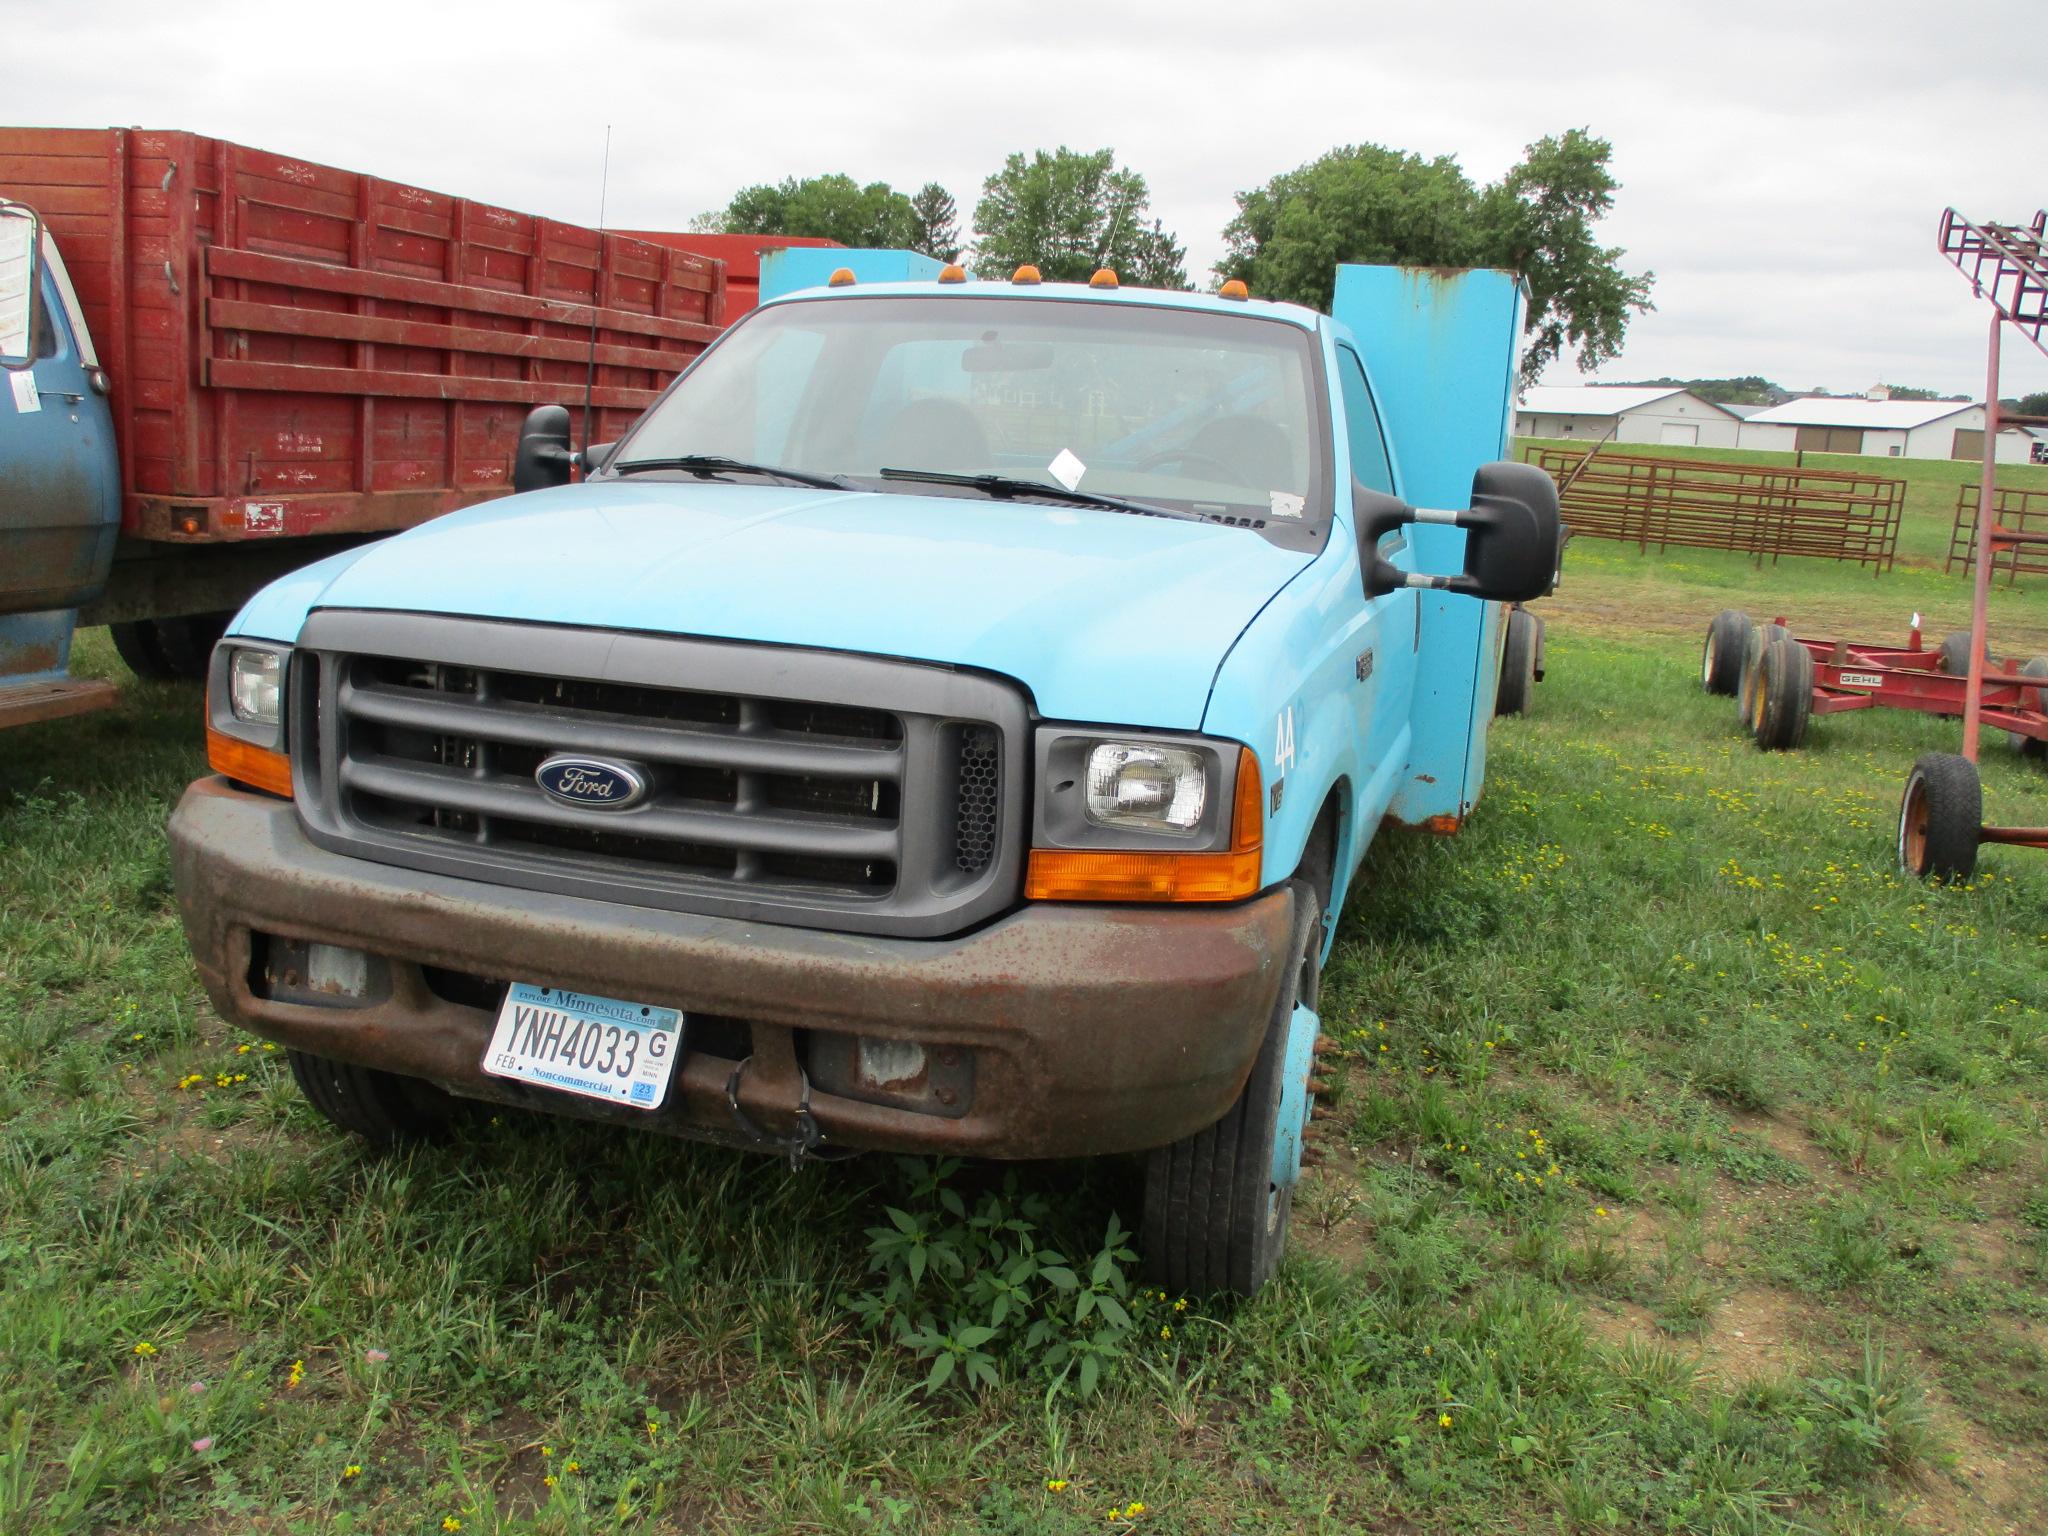 1999 Ford F550, V8 Power Stroke Dsl. dually, 359,305 miles showing, service body, runs & drives